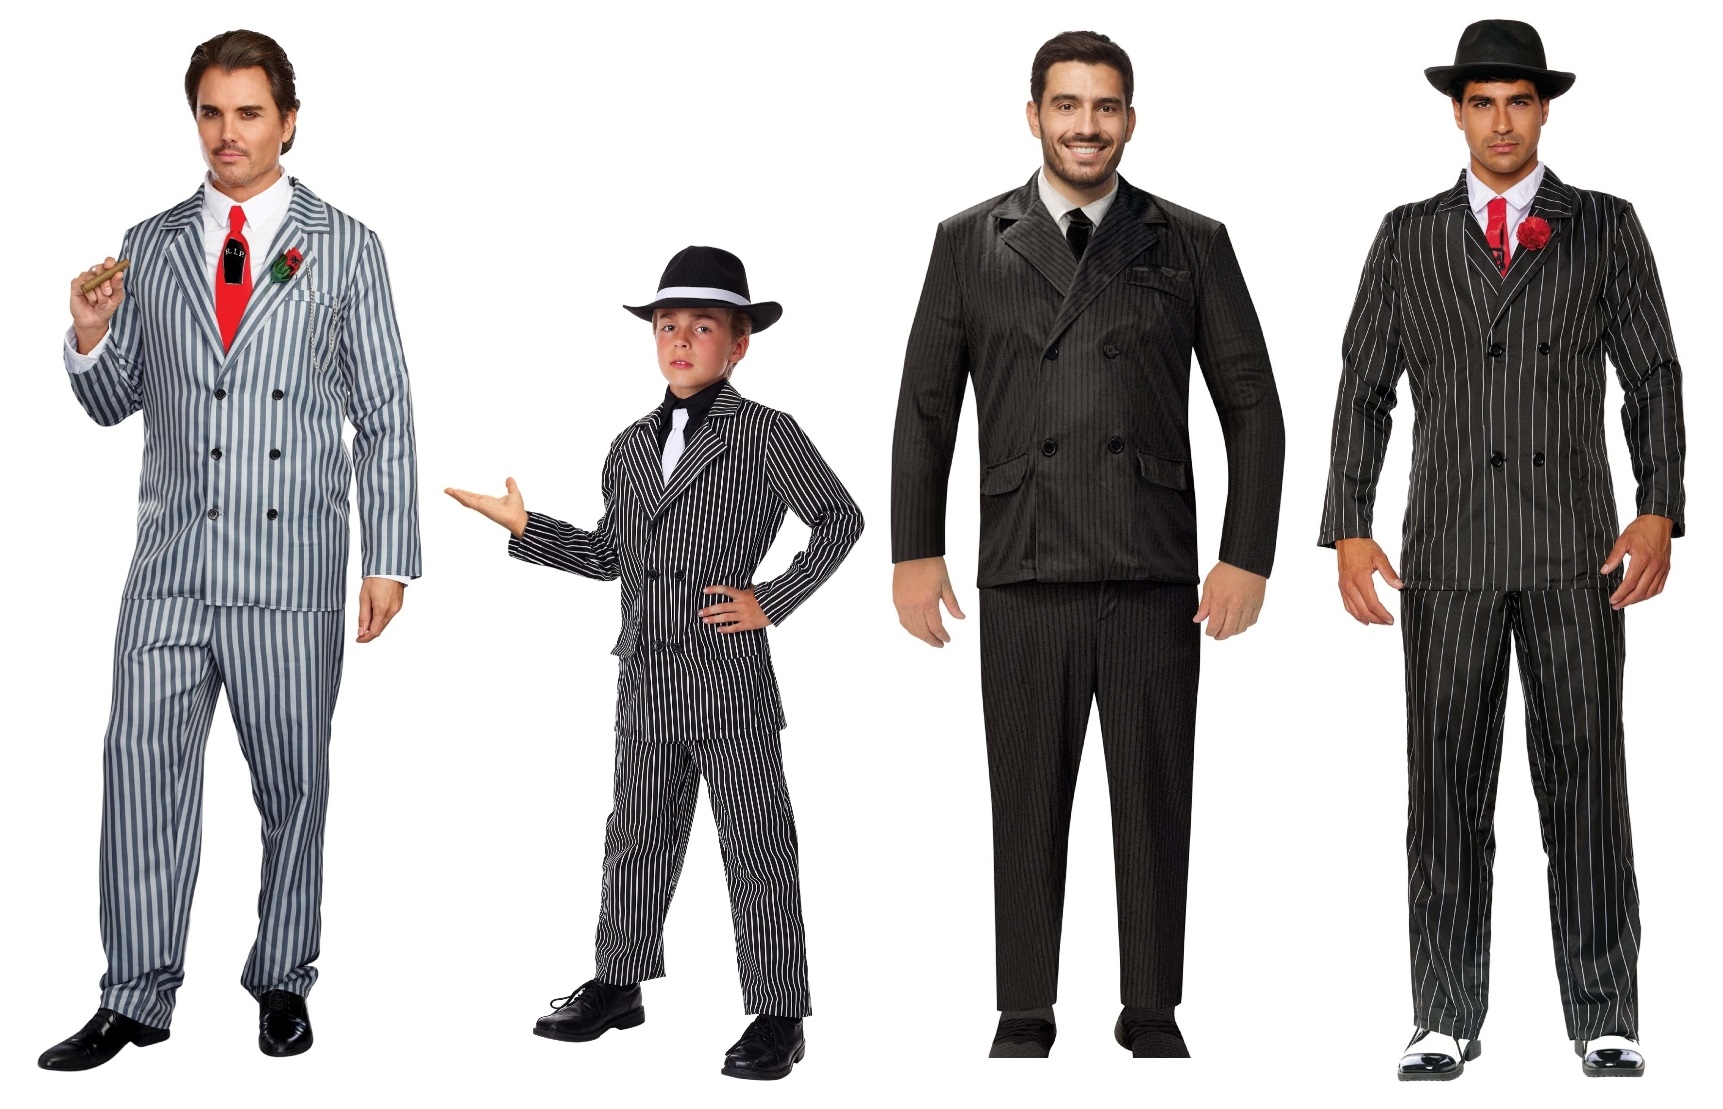 Costumes With Stripes [Costume Guide] - HalloweenCostumes.com Blog